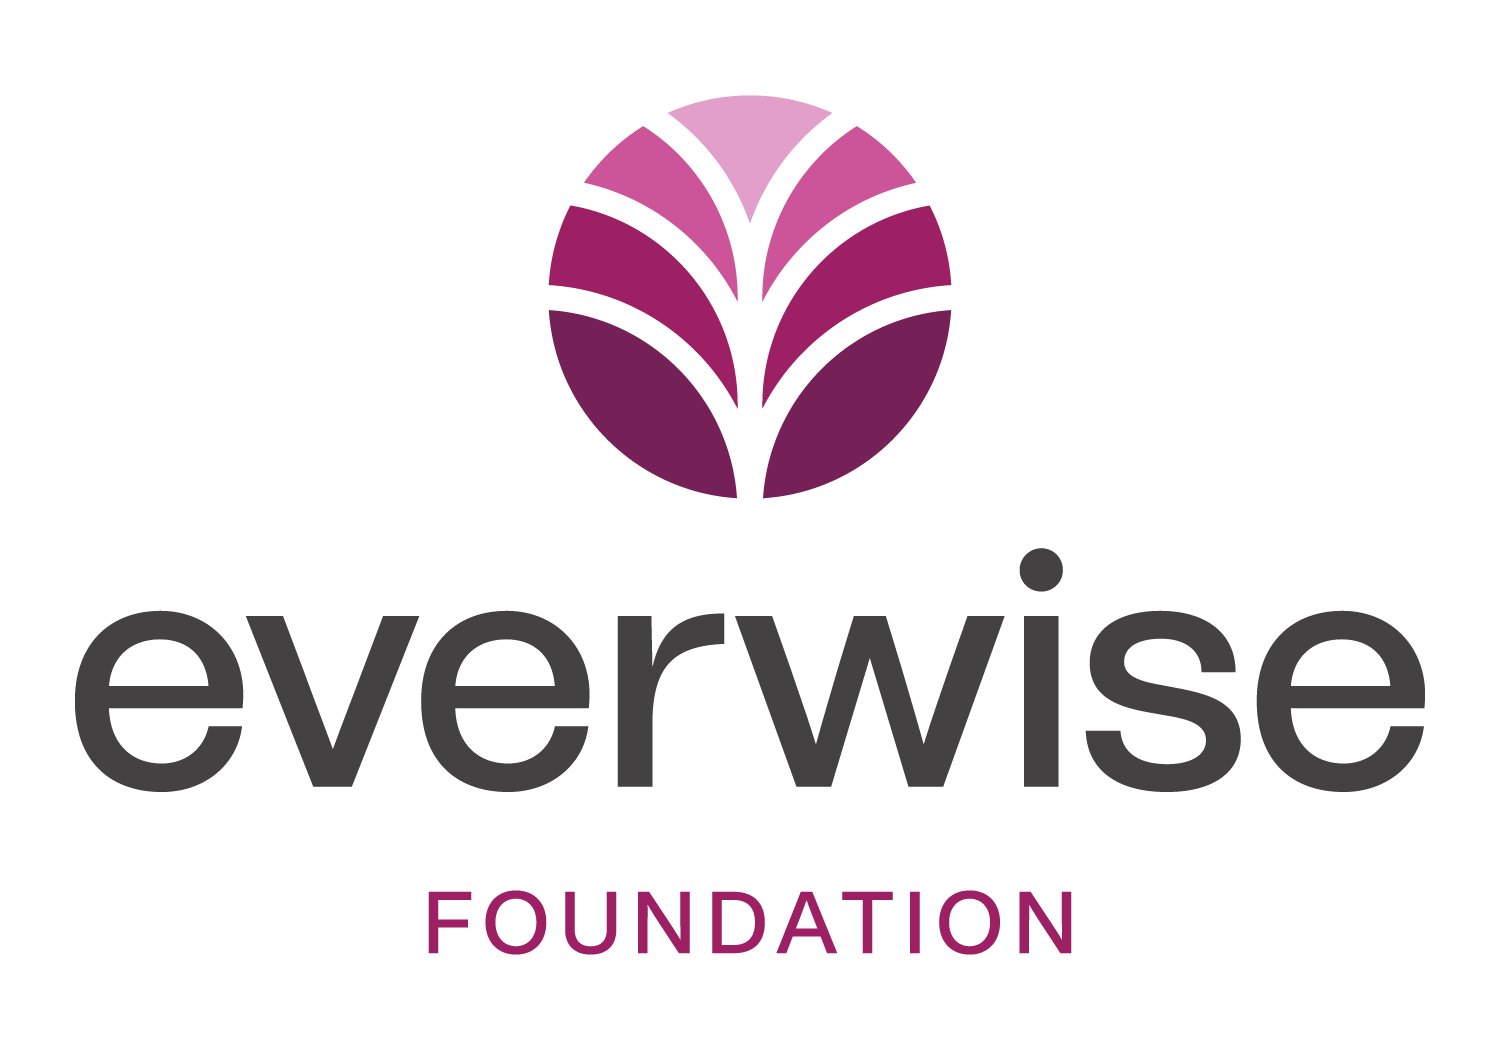 Everwise logo (opens in new window)